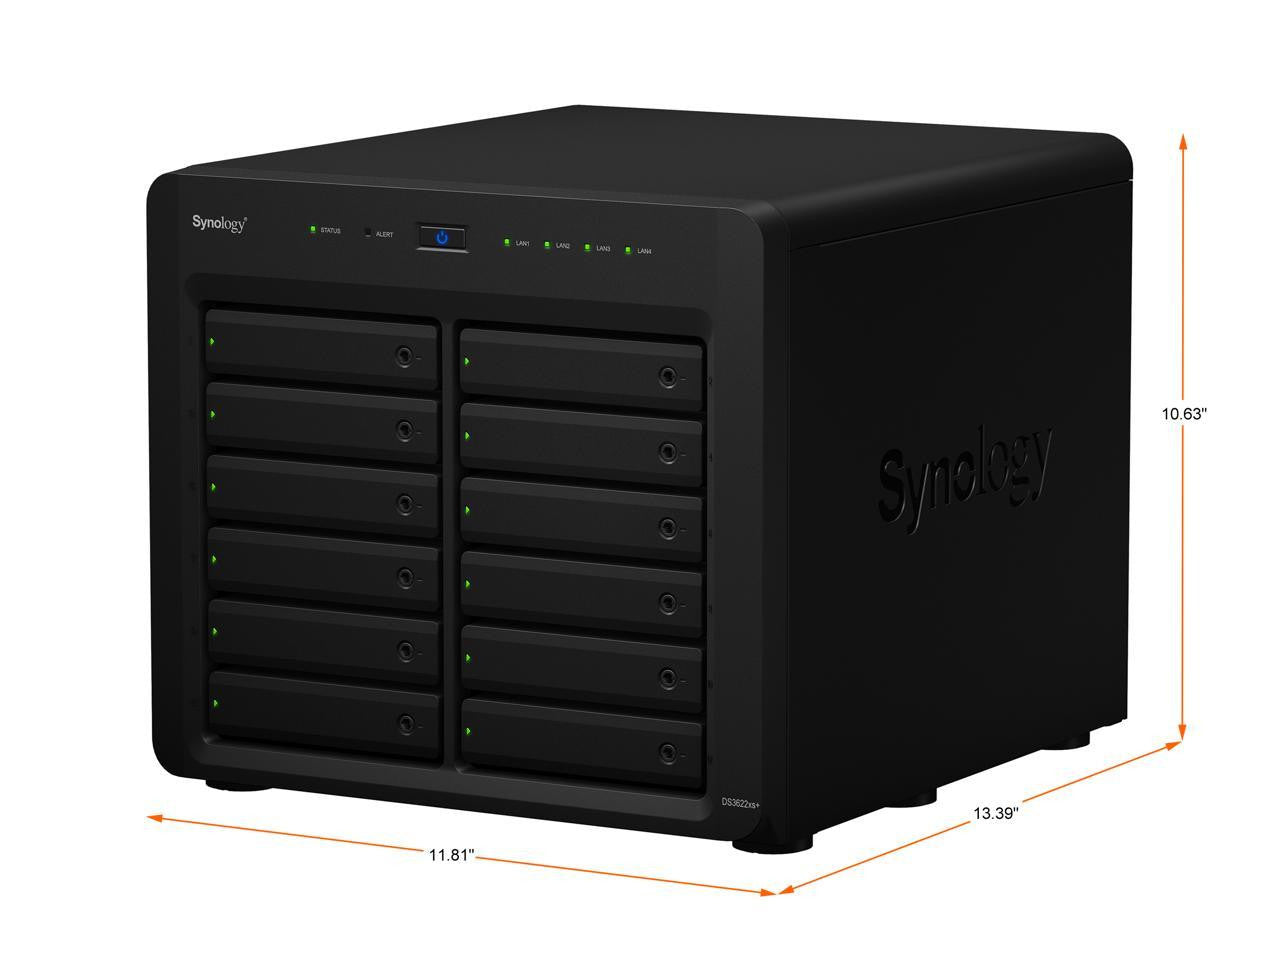 DS3622xs+ 12-BAY DiskStation with 16GB RAM and 48TB (12 x 4TB) of Synology Enterprise Drives